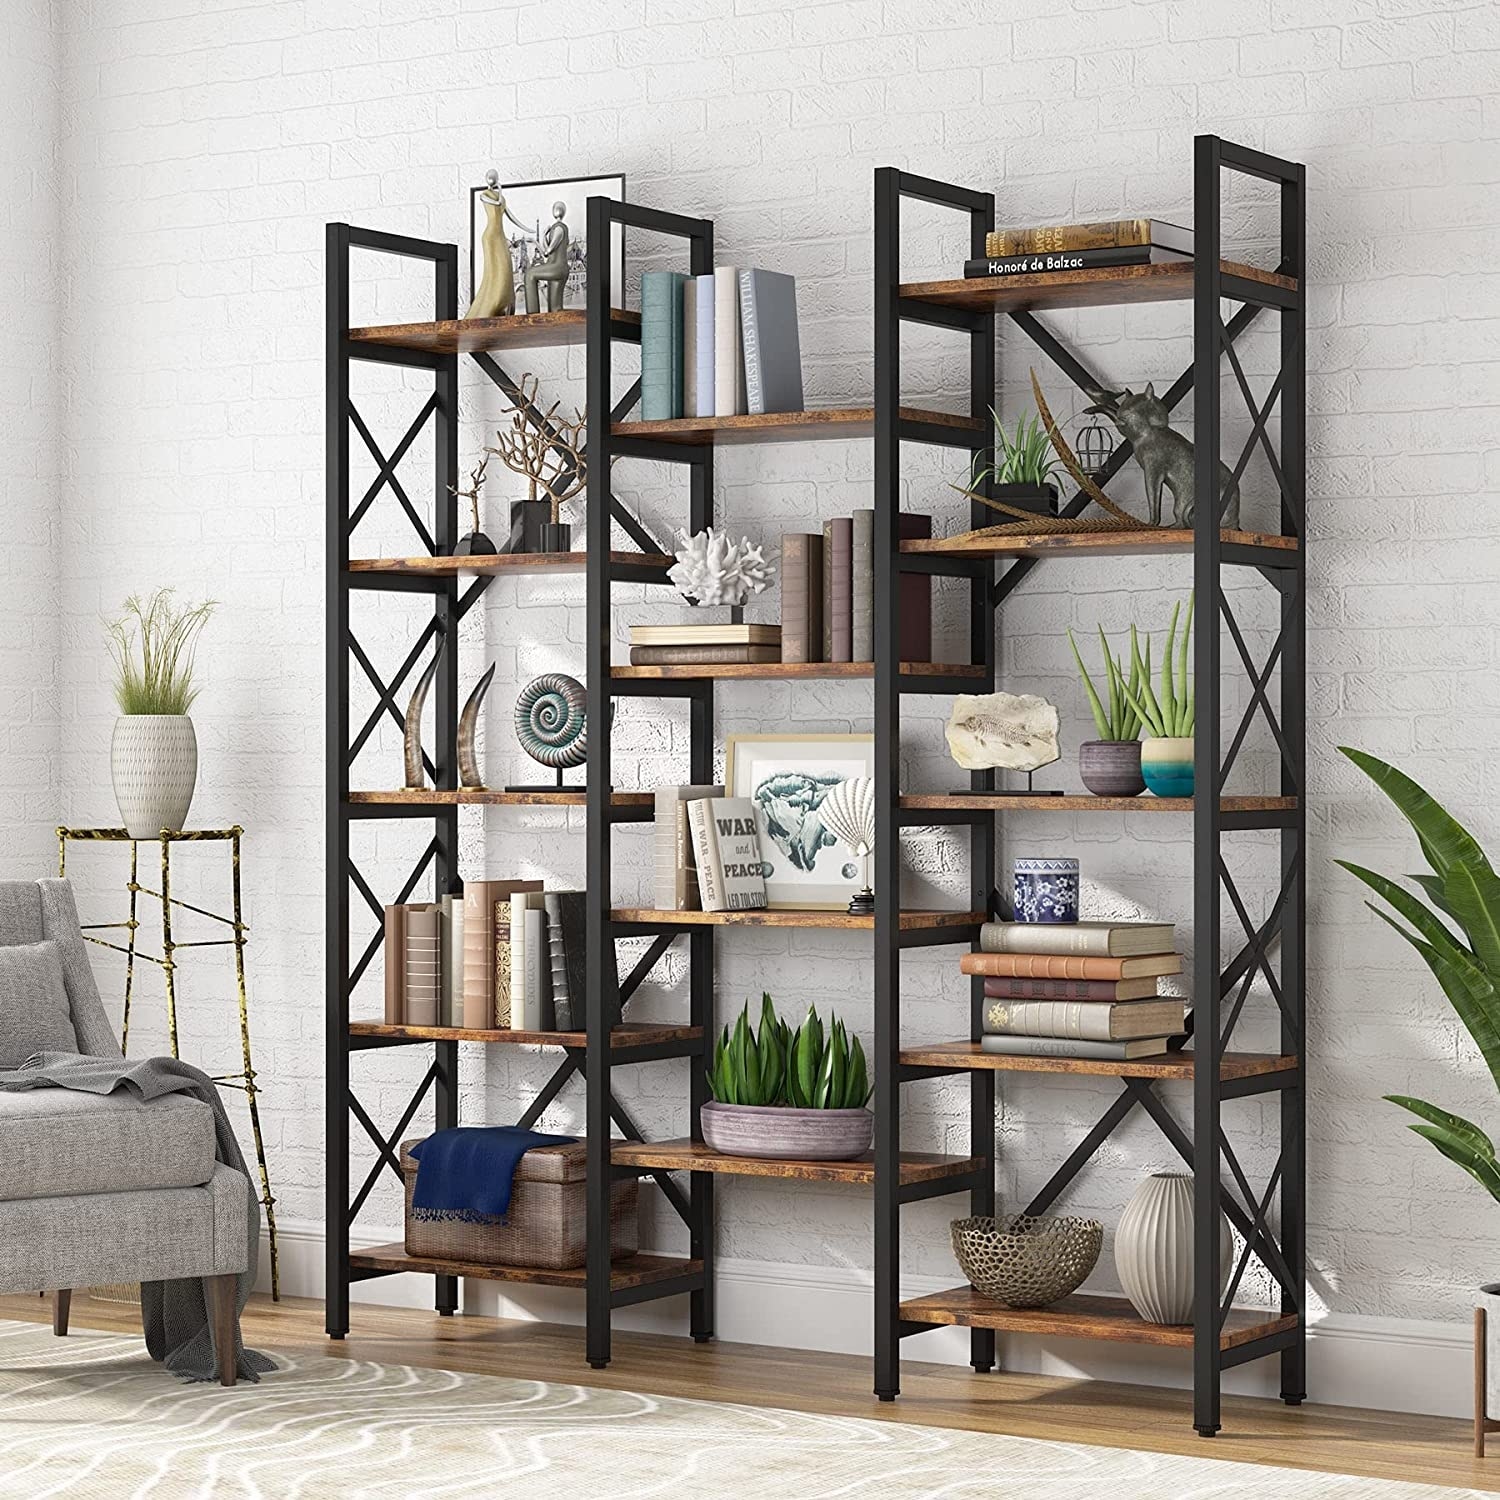 https://ak1.ostkcdn.com/images/products/is/images/direct/a1633c38e5c4780db5183ed74288b982fbfdab92/Large-Triple-Wide-5-Shelf-Etagere-Bookcase.jpg